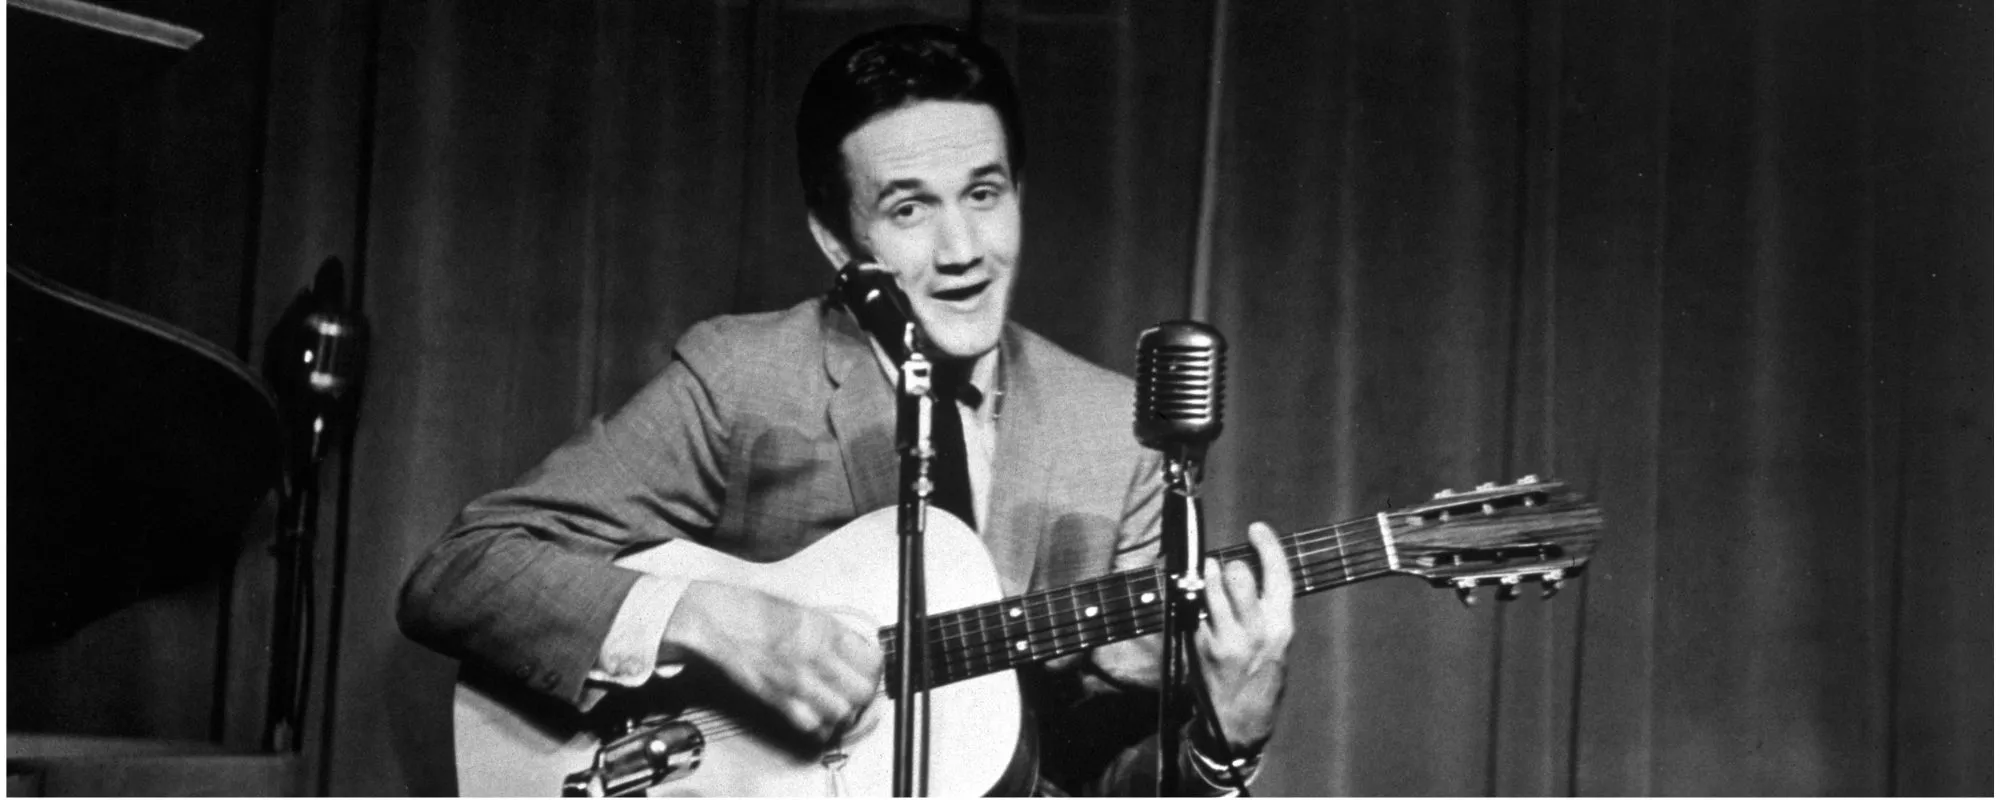 Meaning Behind Roger Miller’s Novelty Song “Chug-a-Lug”